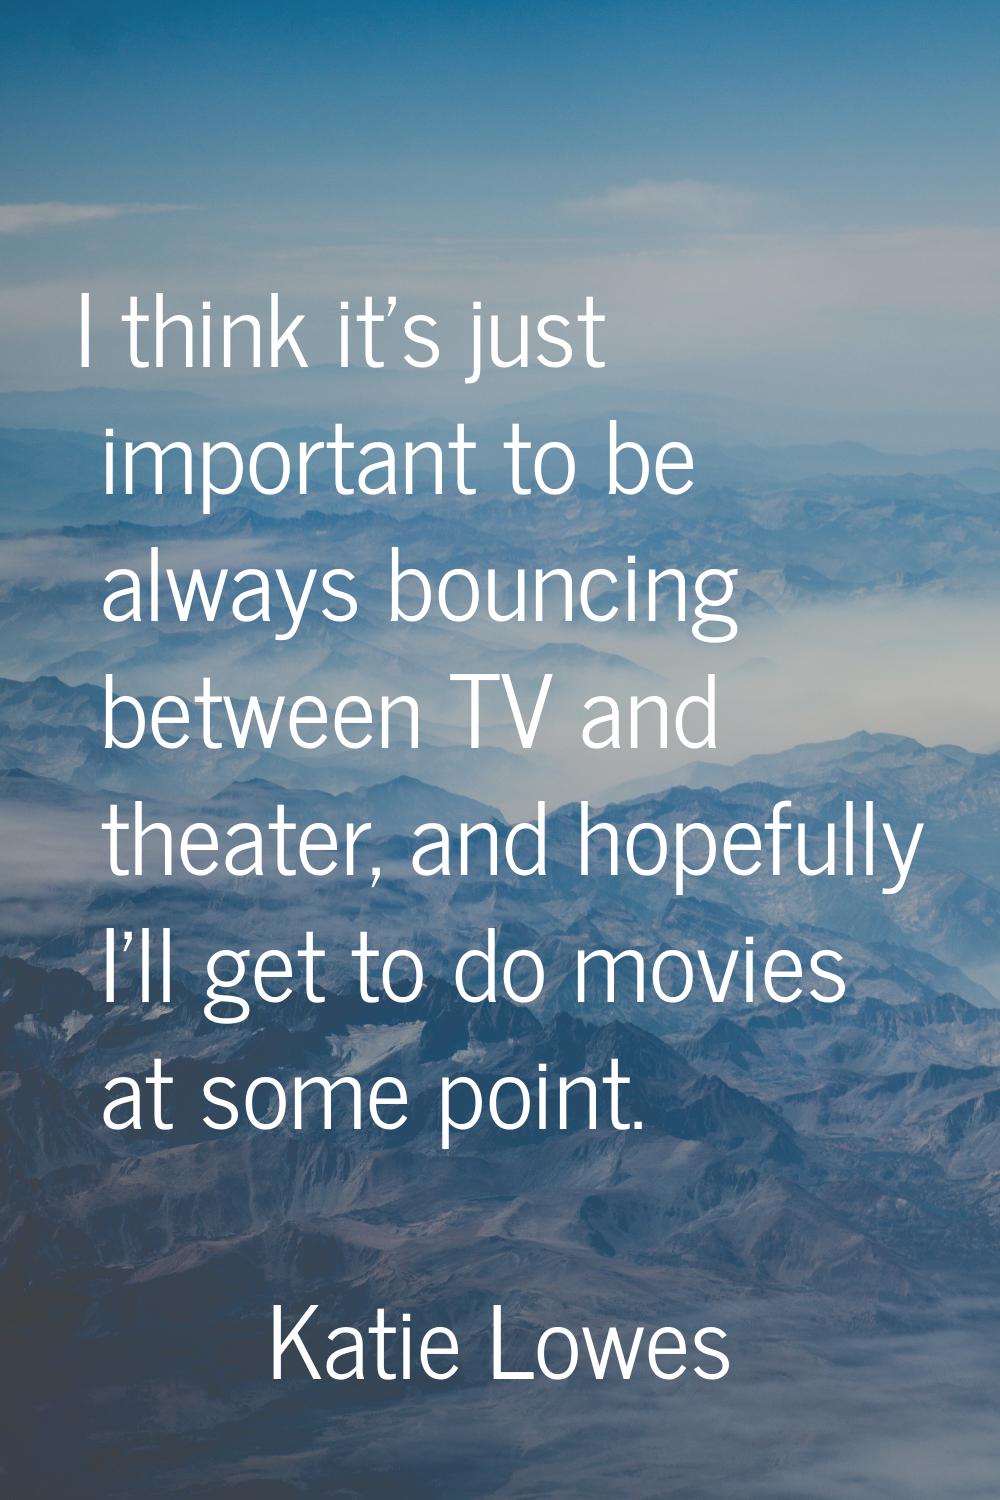 I think it's just important to be always bouncing between TV and theater, and hopefully I'll get to